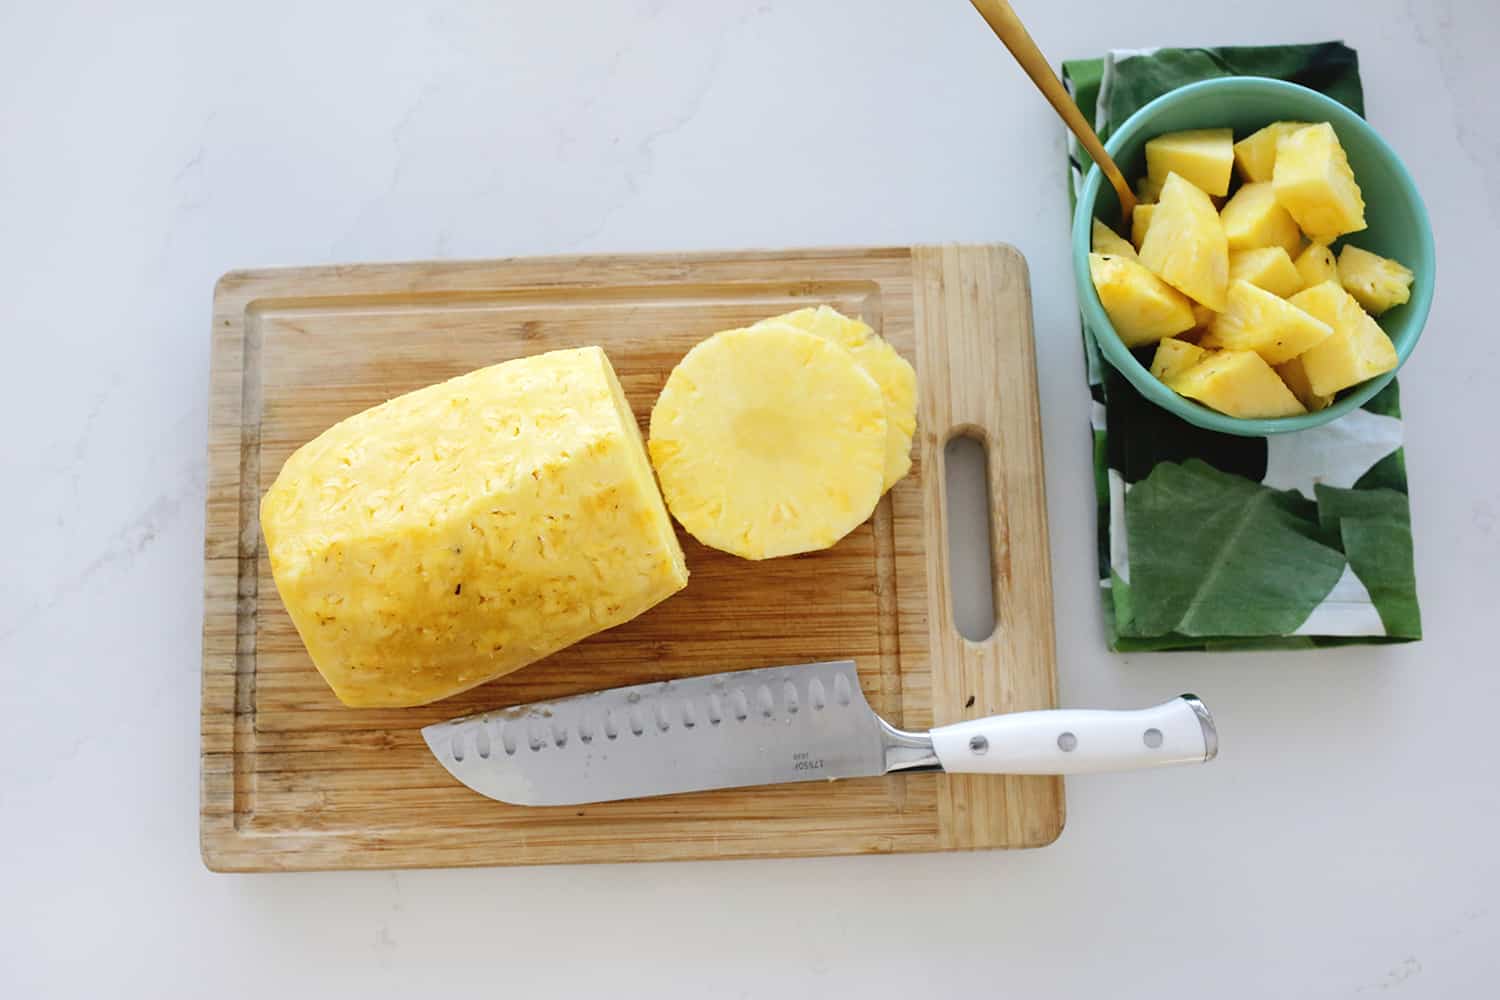 cut pineapple into rounds